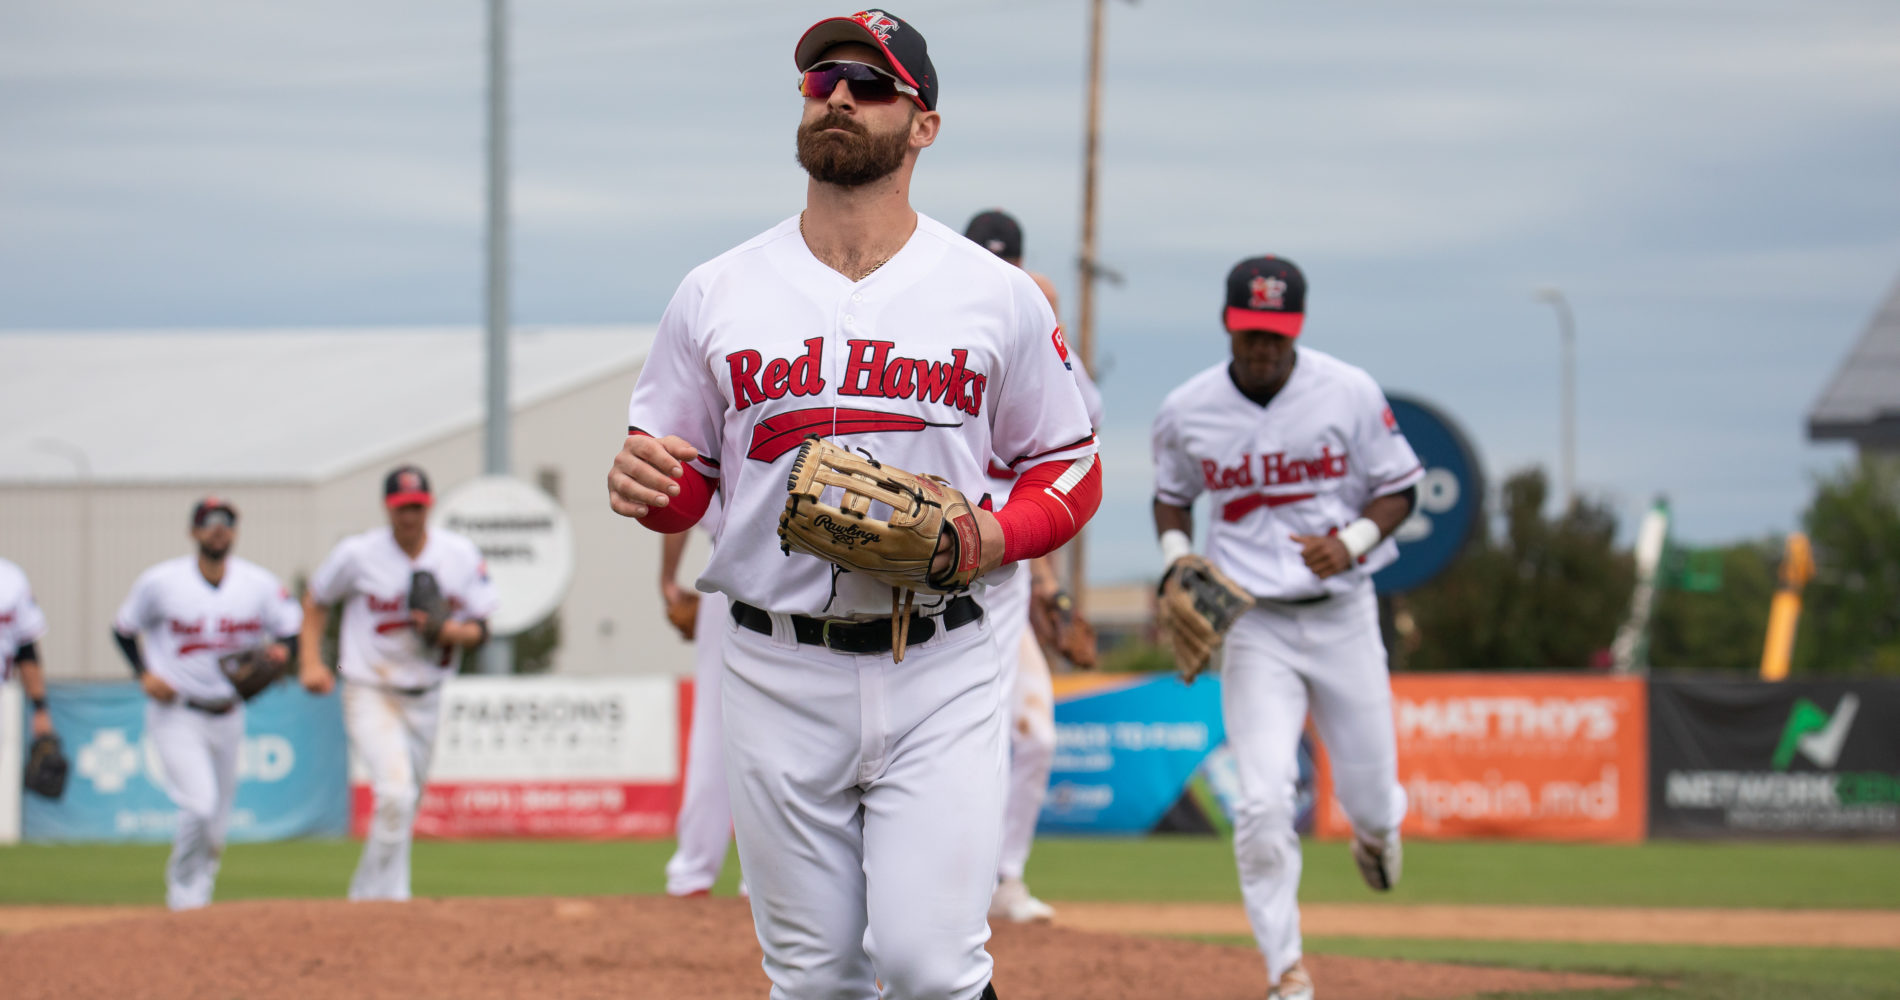 The RedHawks announce details for suspended game’s resumption